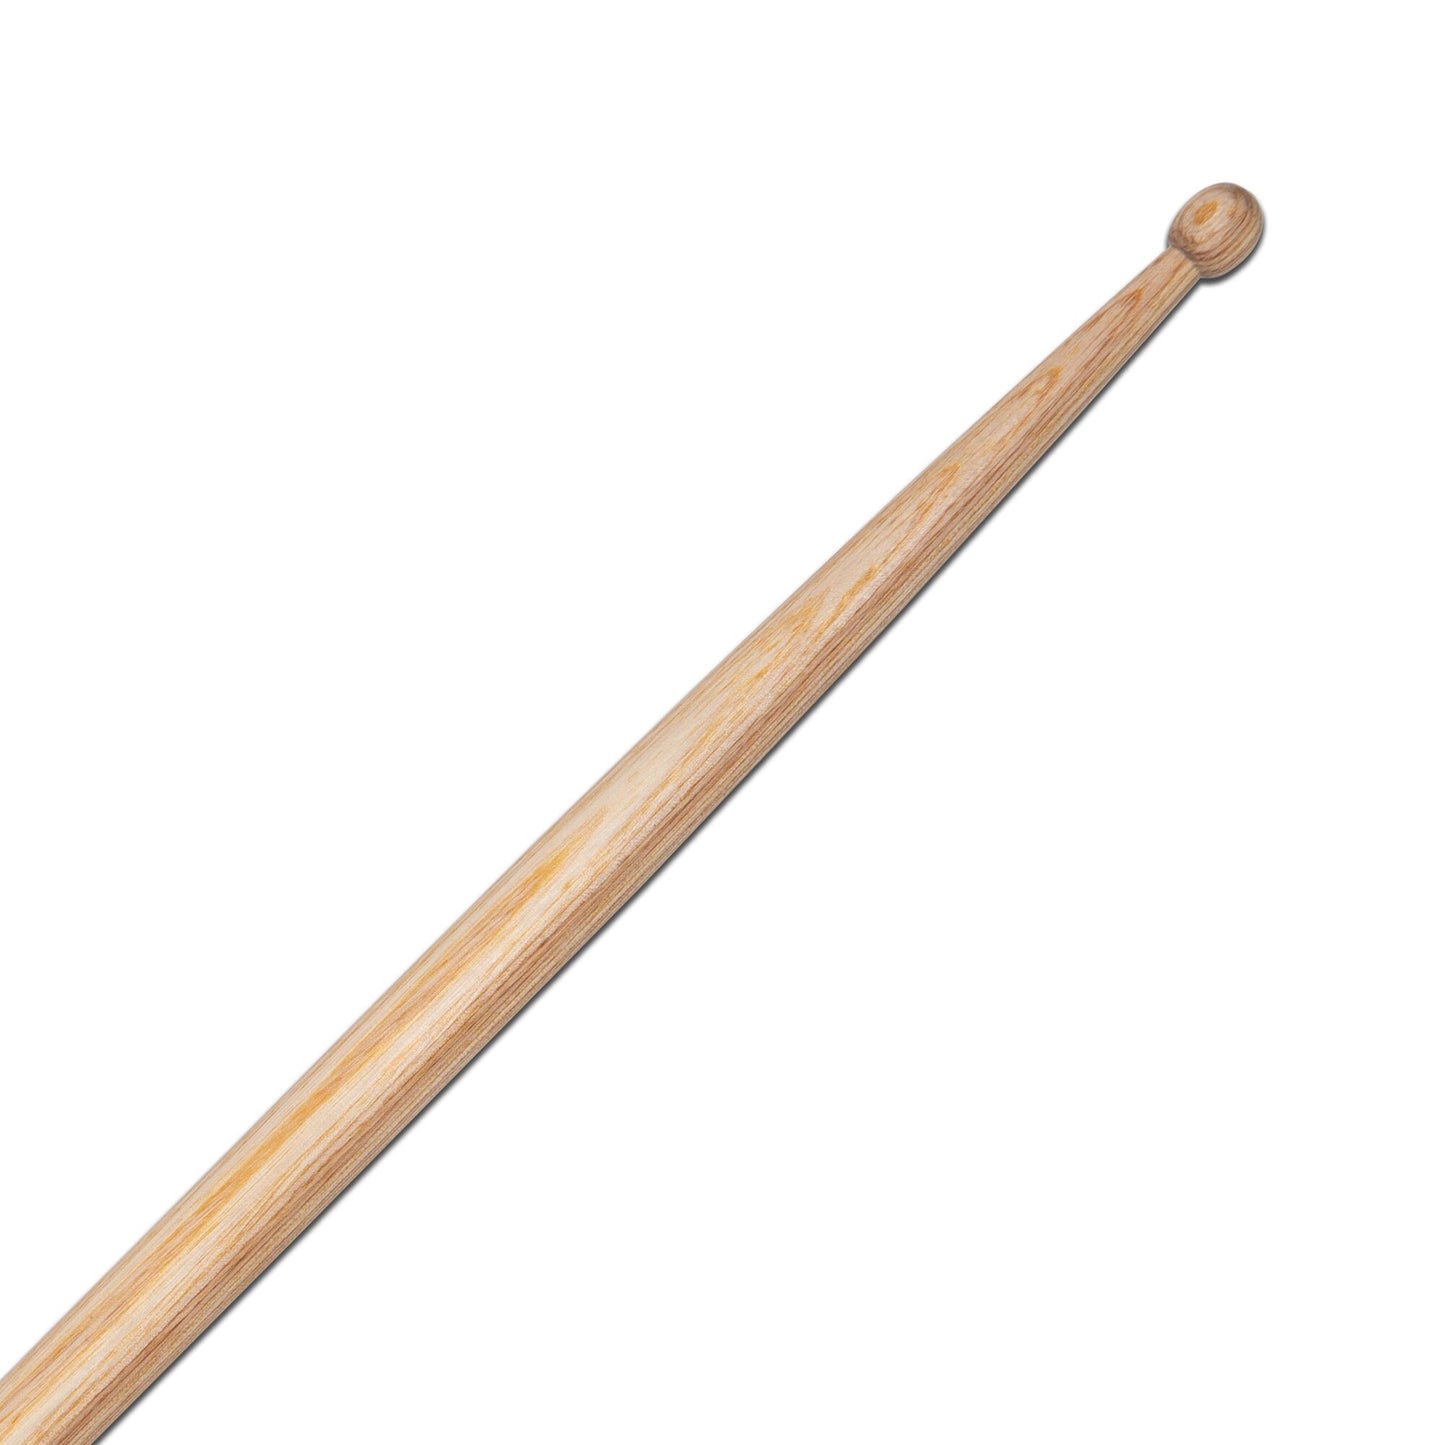 Symphonic Collection -- Jake Nissly Signature Drumsticks